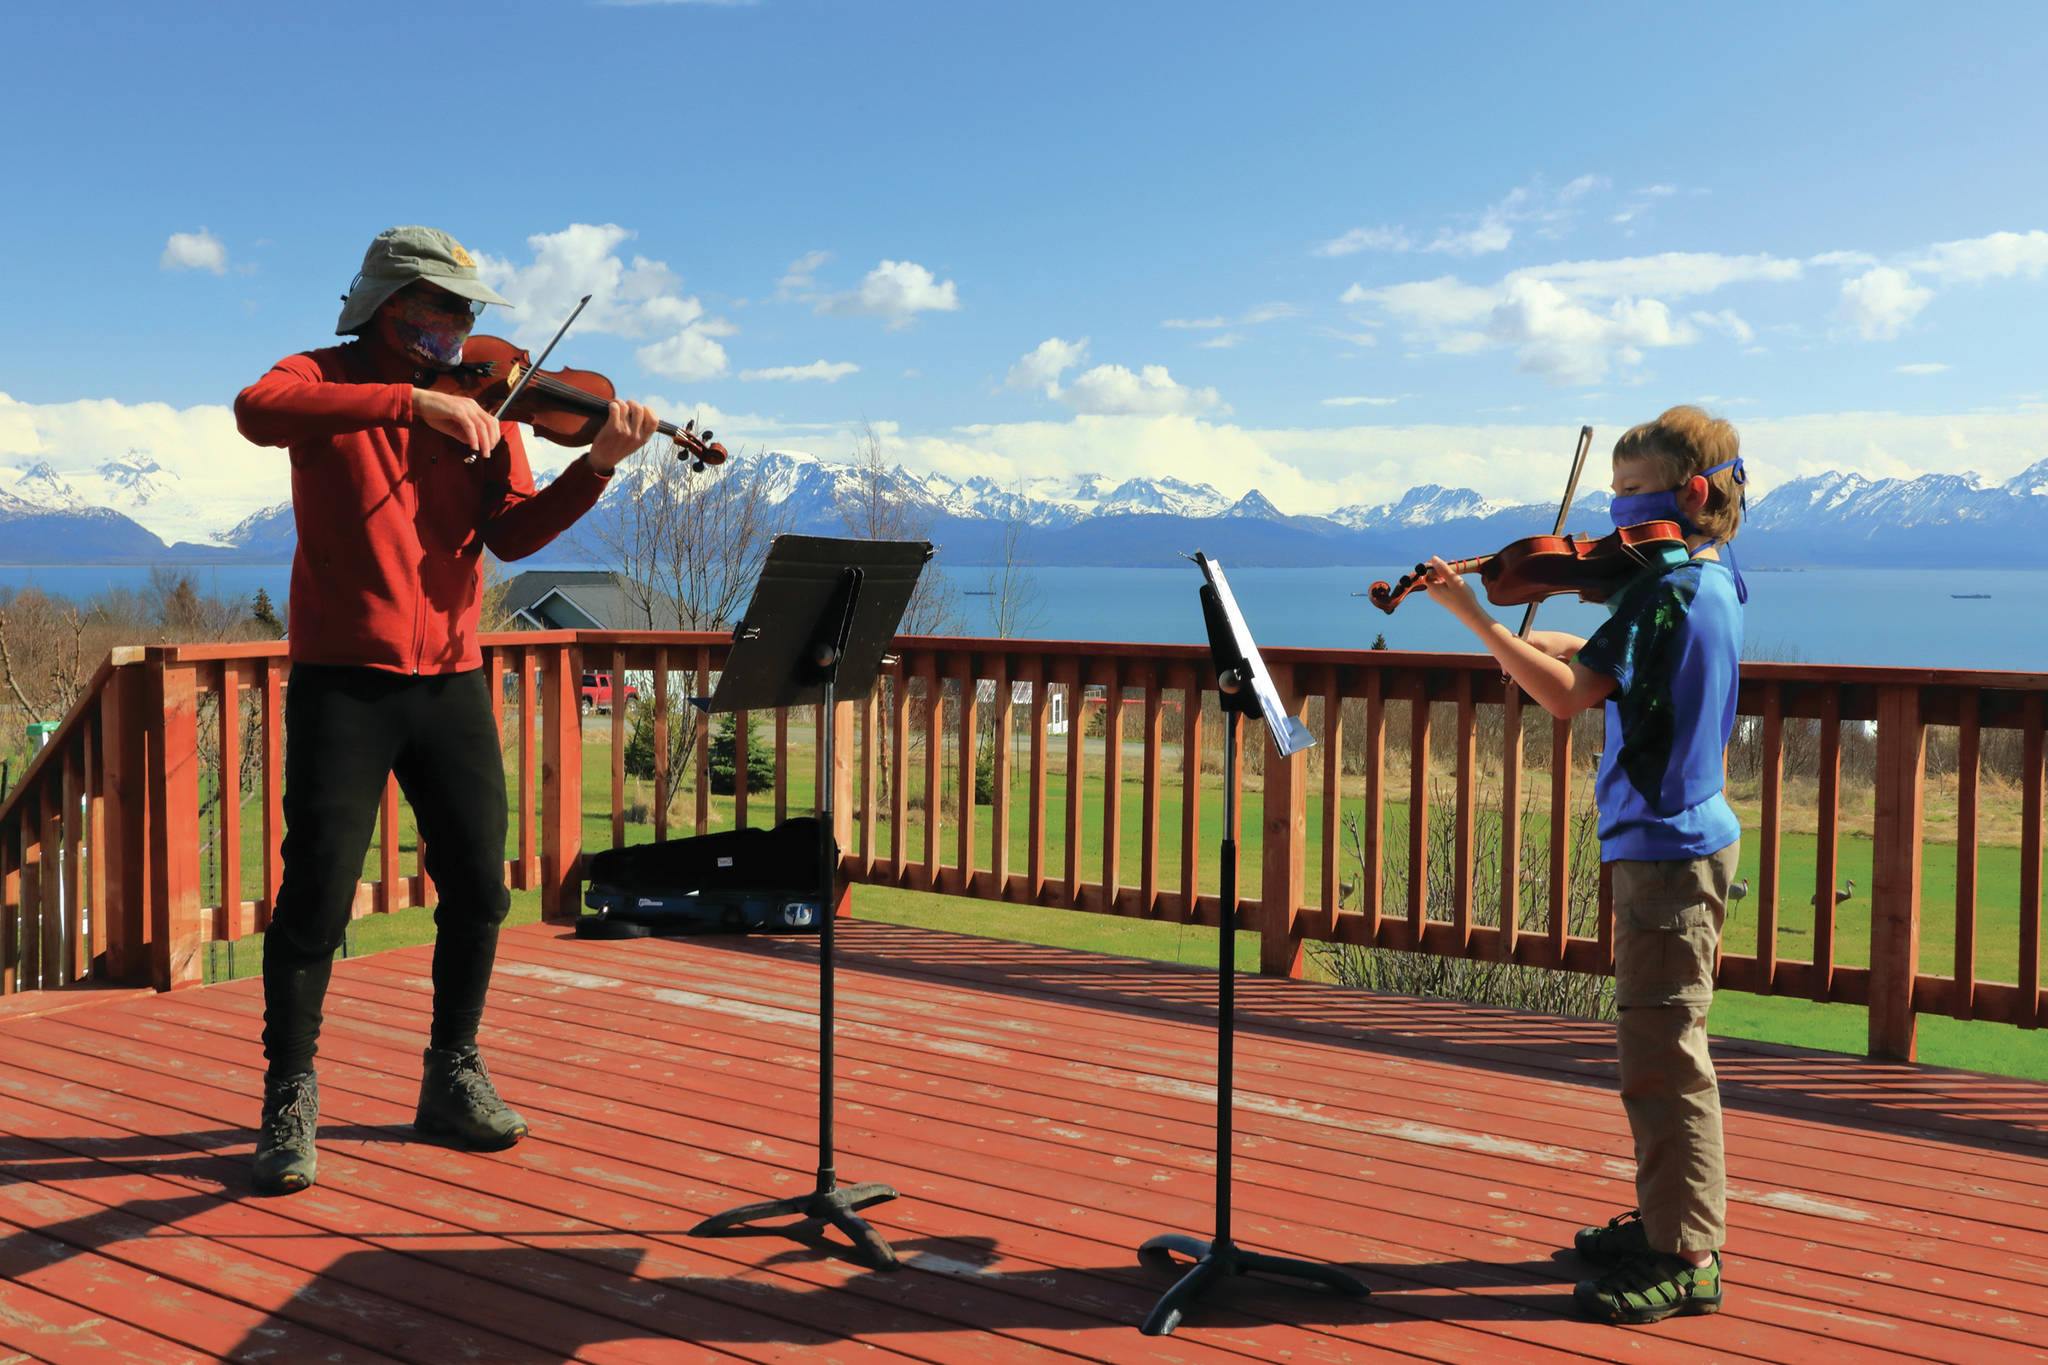 Violin instructor Daniel Perry, left, teaches student Daniel Christ, right, in an outdoor session on April 30, 2020, in Homer, Alaska. (Photo by Aaron Christ)